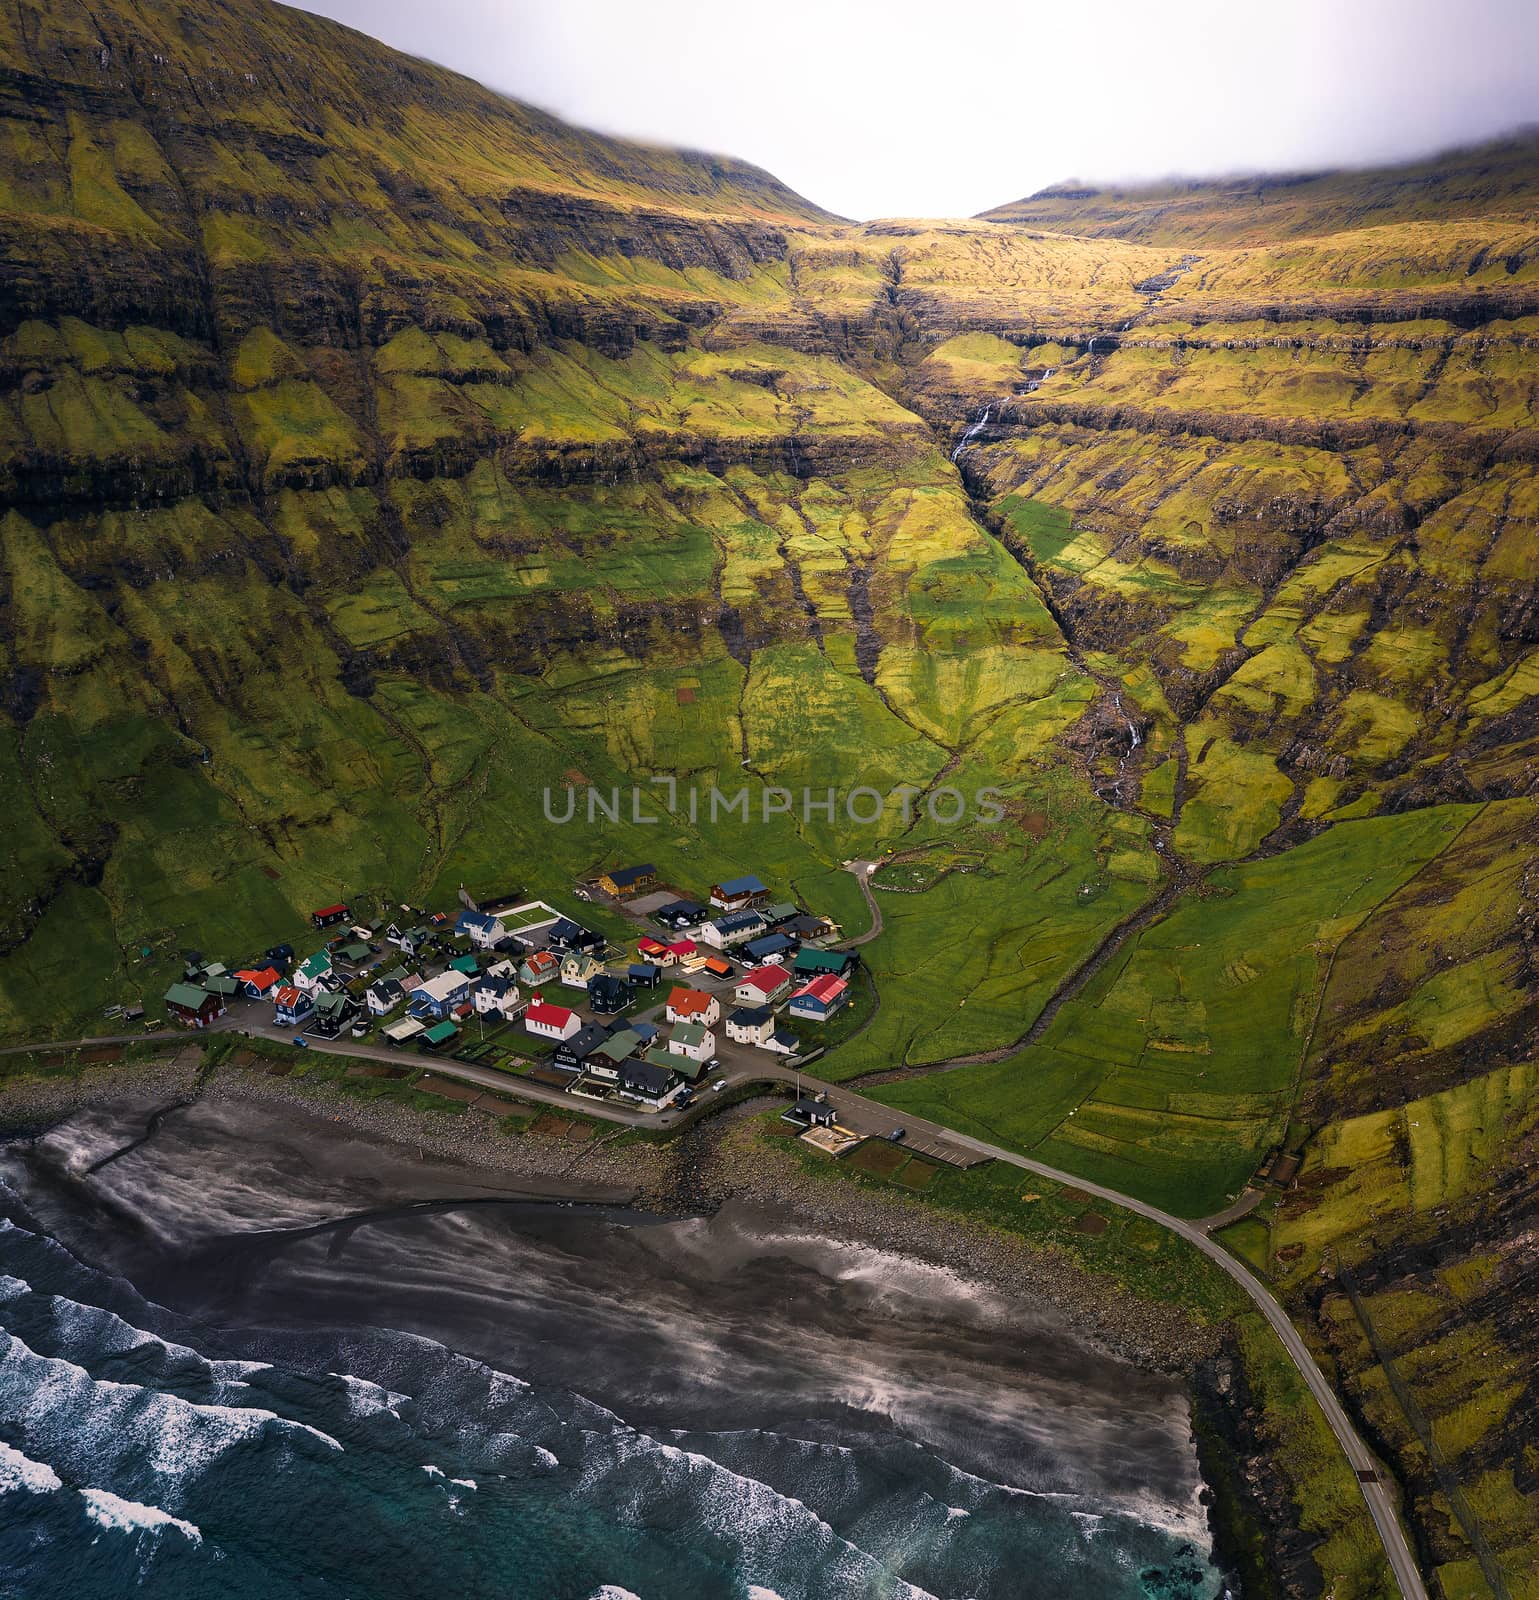 Aerial view of the Tjornuvik village and its beach located at a beautiful bay in the Faroe Islands, Denmark.